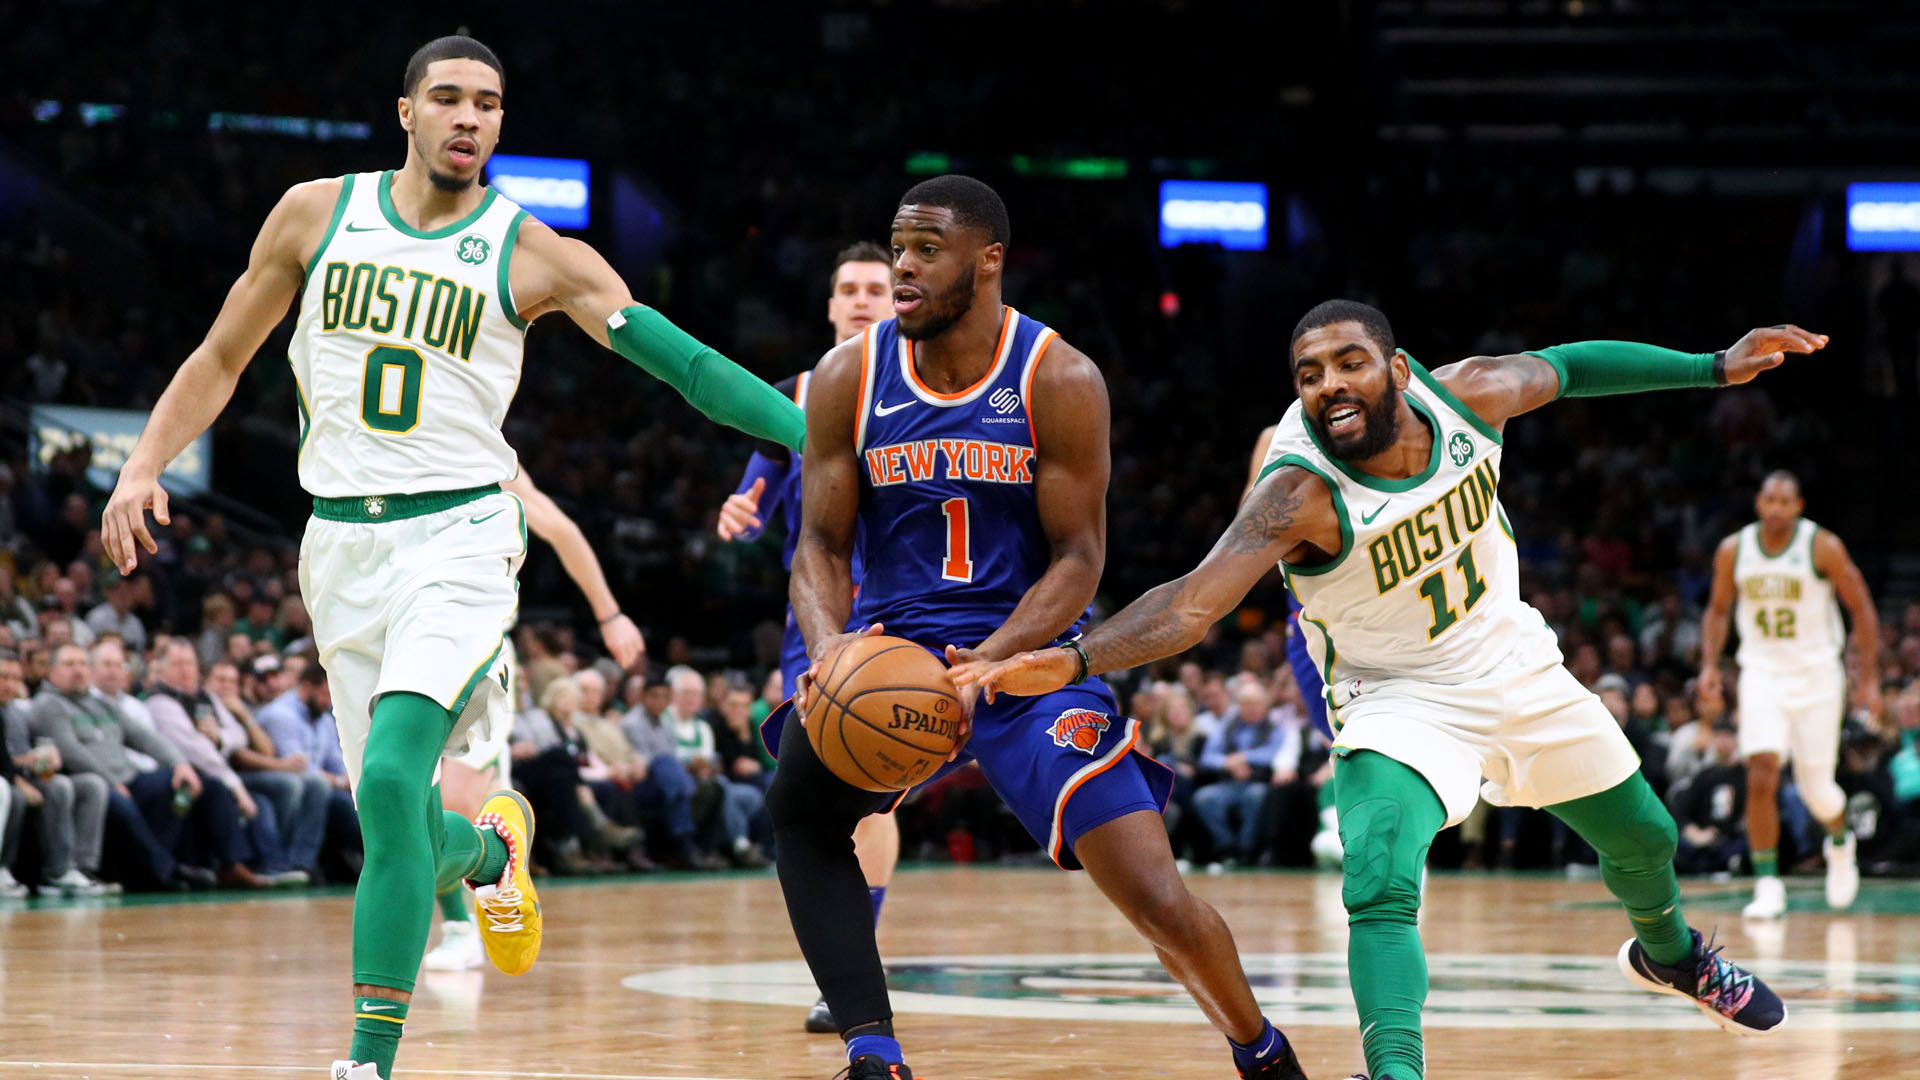 The Boston Celtics eased past the New York Knicks to extend their winning streak in the NBA.